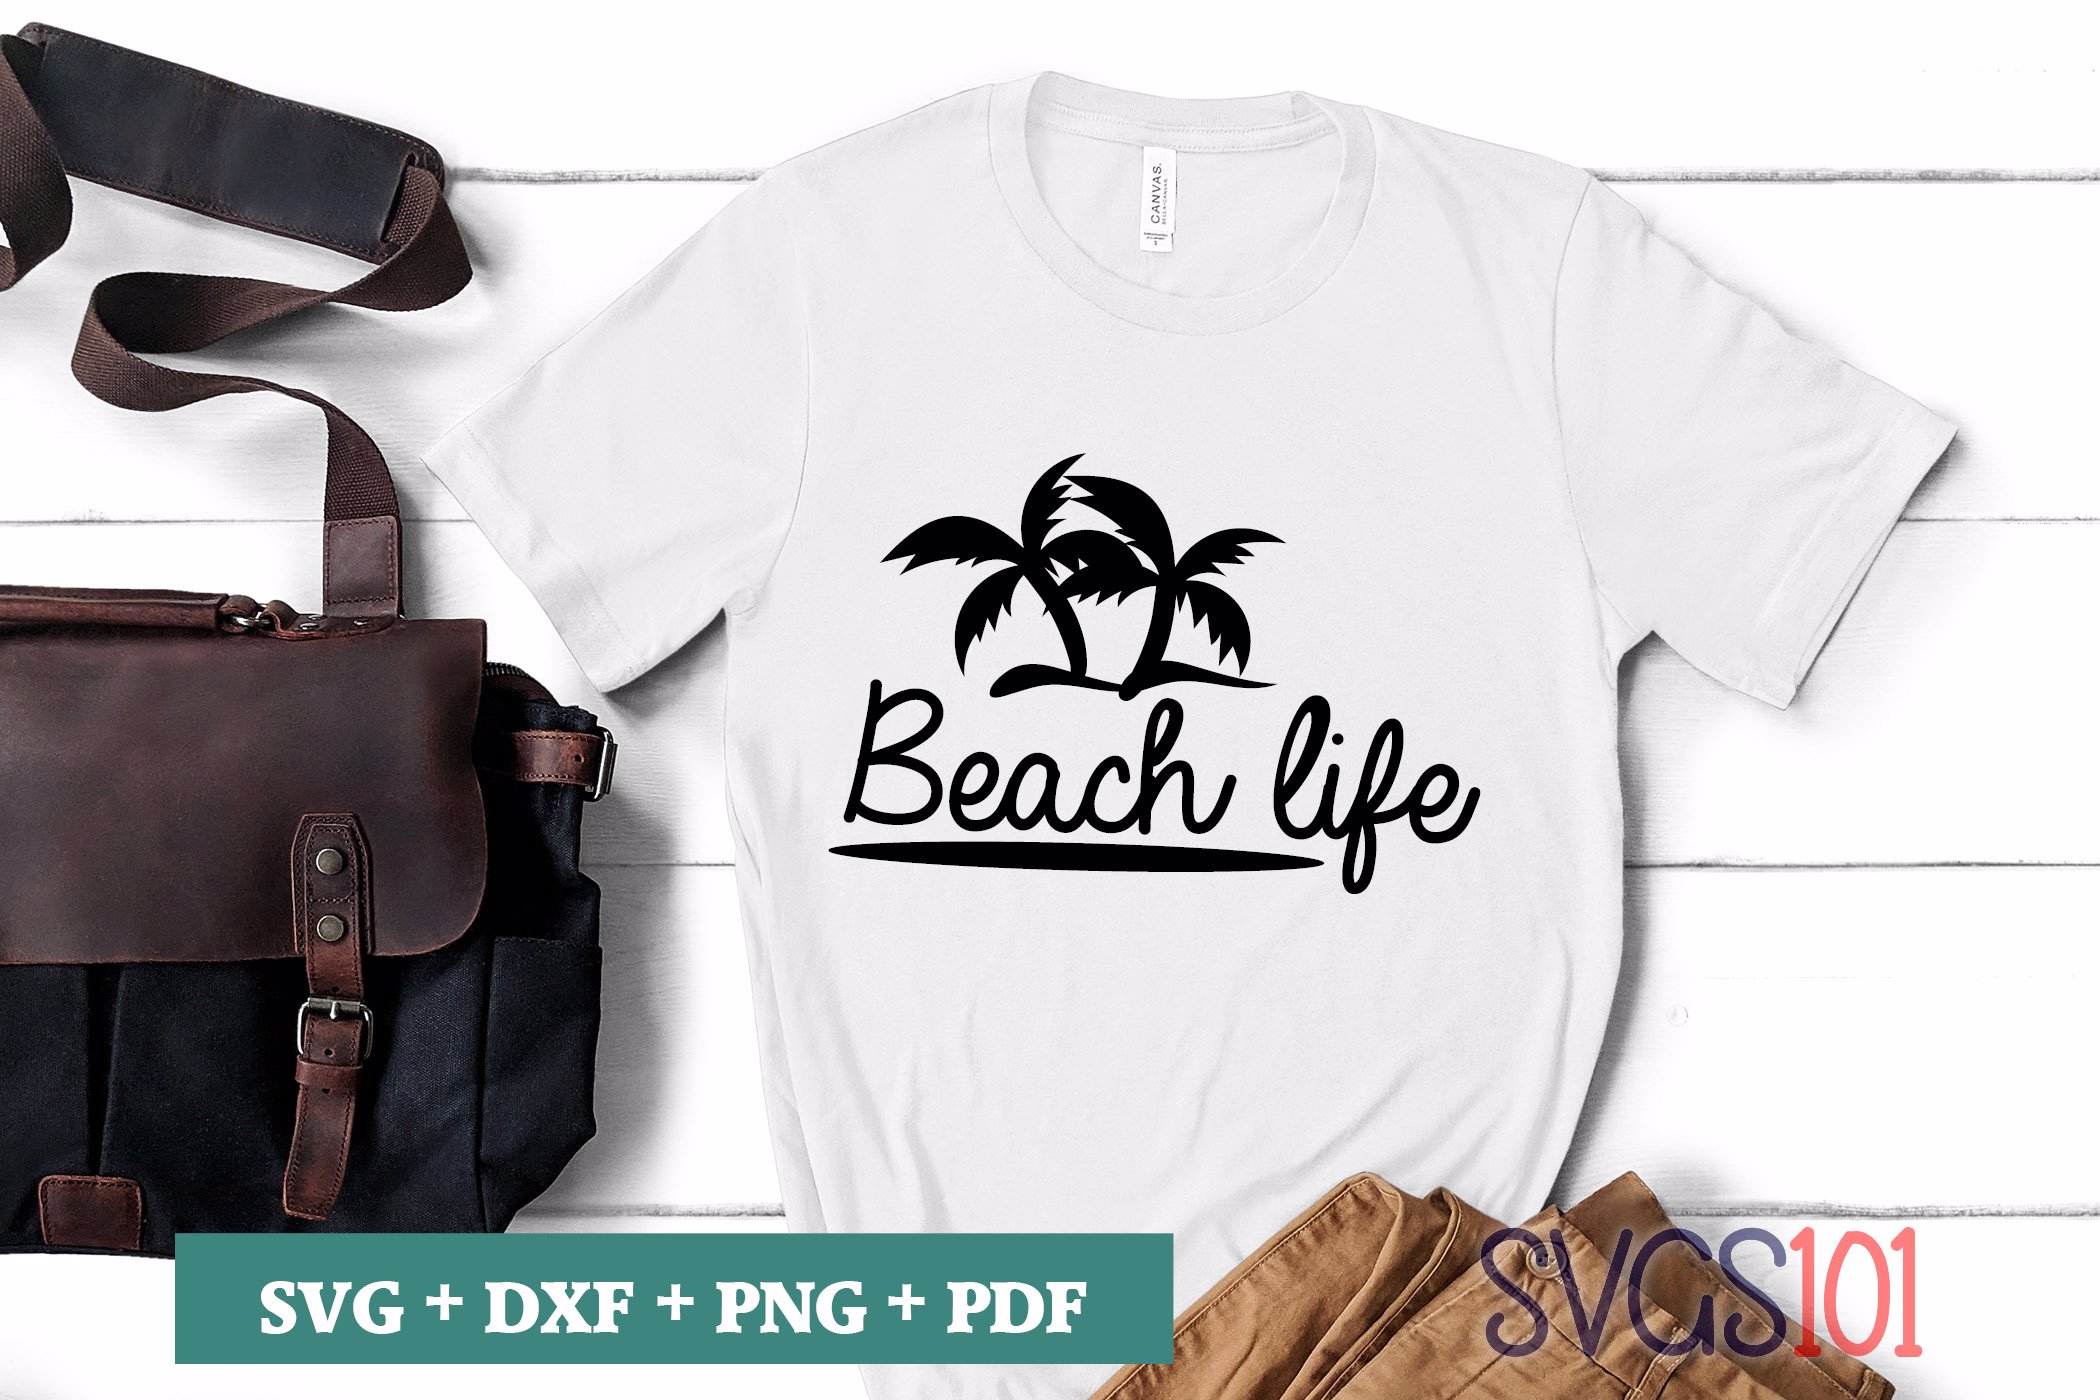 Beach Life SVG Cuttable file - DXF, EPS, PNG, PDF | SVG Cutting File